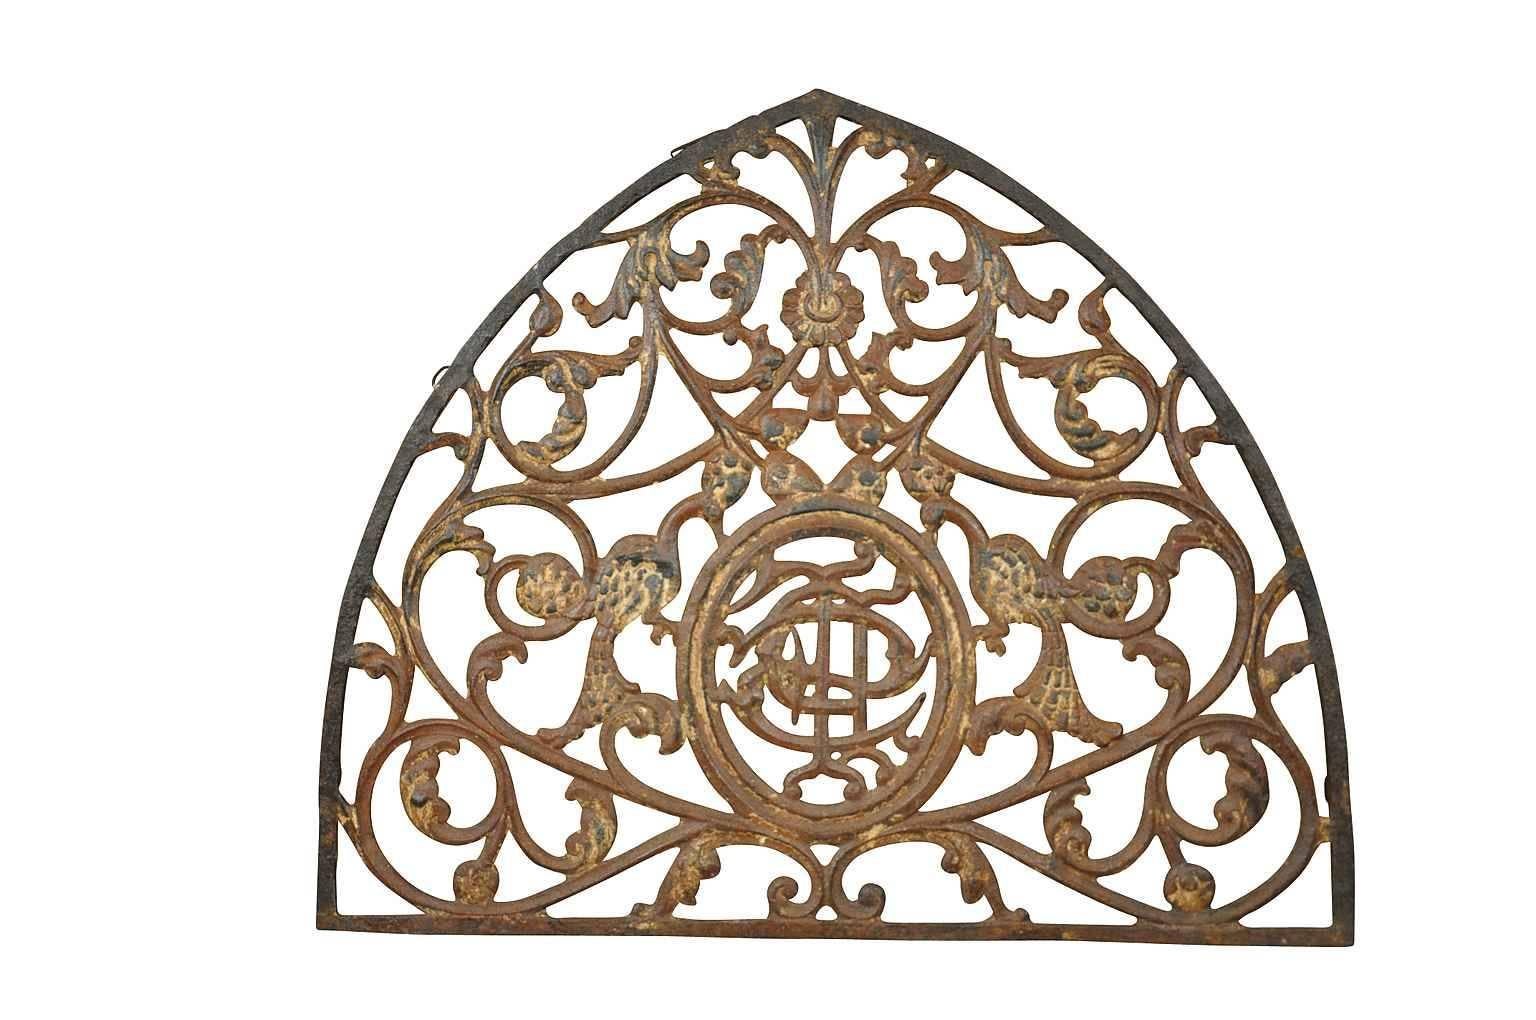 A wonderful French 18th century Gothic style architectural fragment - over door pediment. Expertly crafted in cast iron and retaining traces of the original paint. Wonderful s a wall-mounted piece, converted into a mirror or incorporated into a